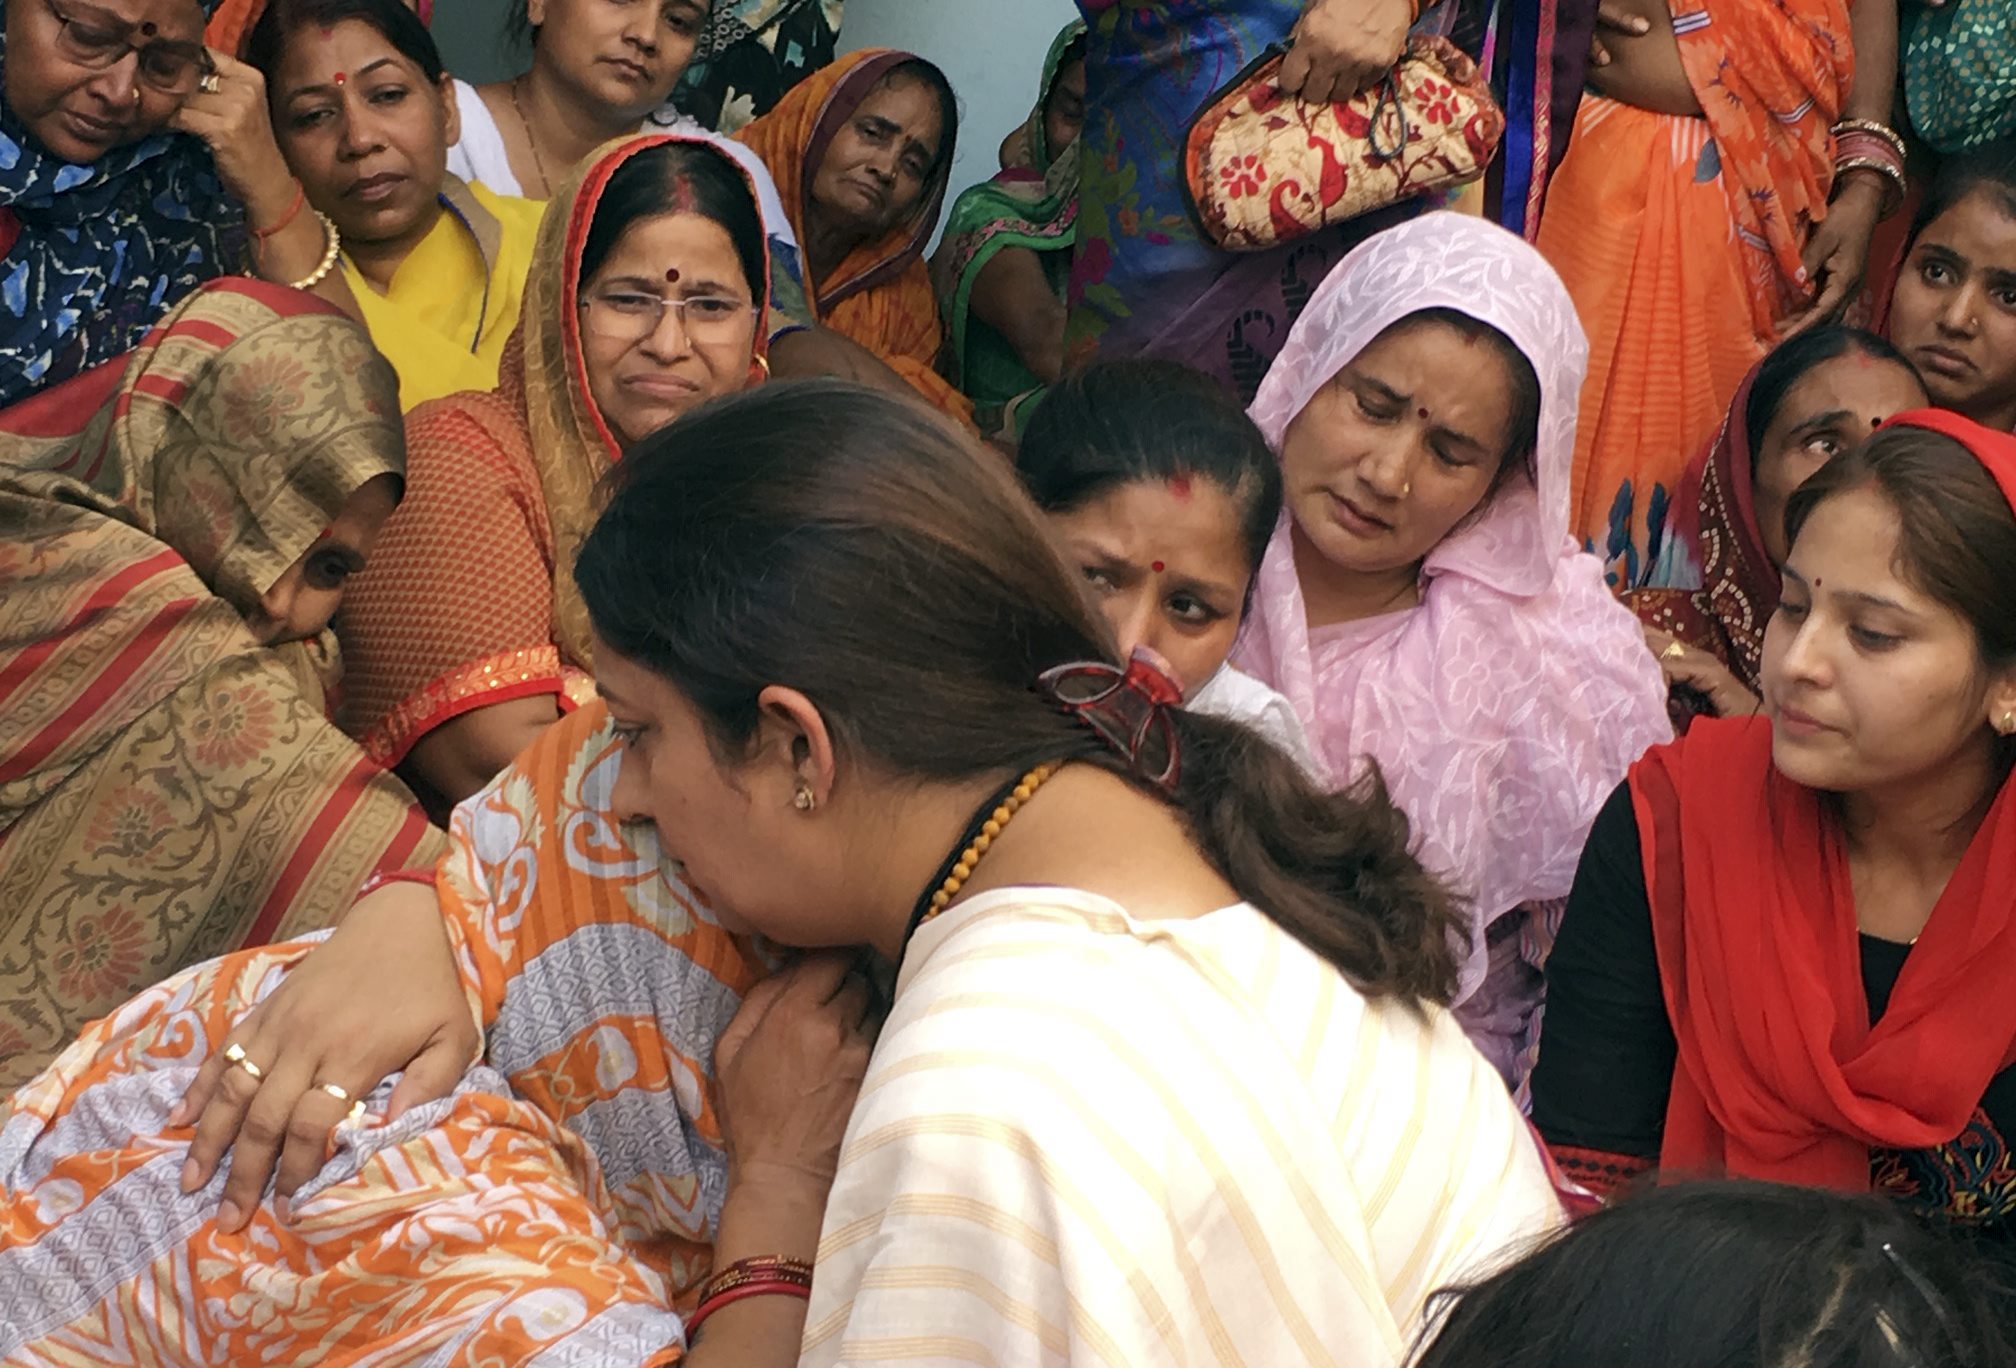 BJP MP Smriti Irani consoles the family members of former village head (pradhan) Surendra Singh, who was shot dead unidentified miscreants, at his village in Amethi, Sunday, May 26, 2019. Singh is believed to have worked closely with Irani and was part of the BJP team that did the ground work in Amethi - PTI